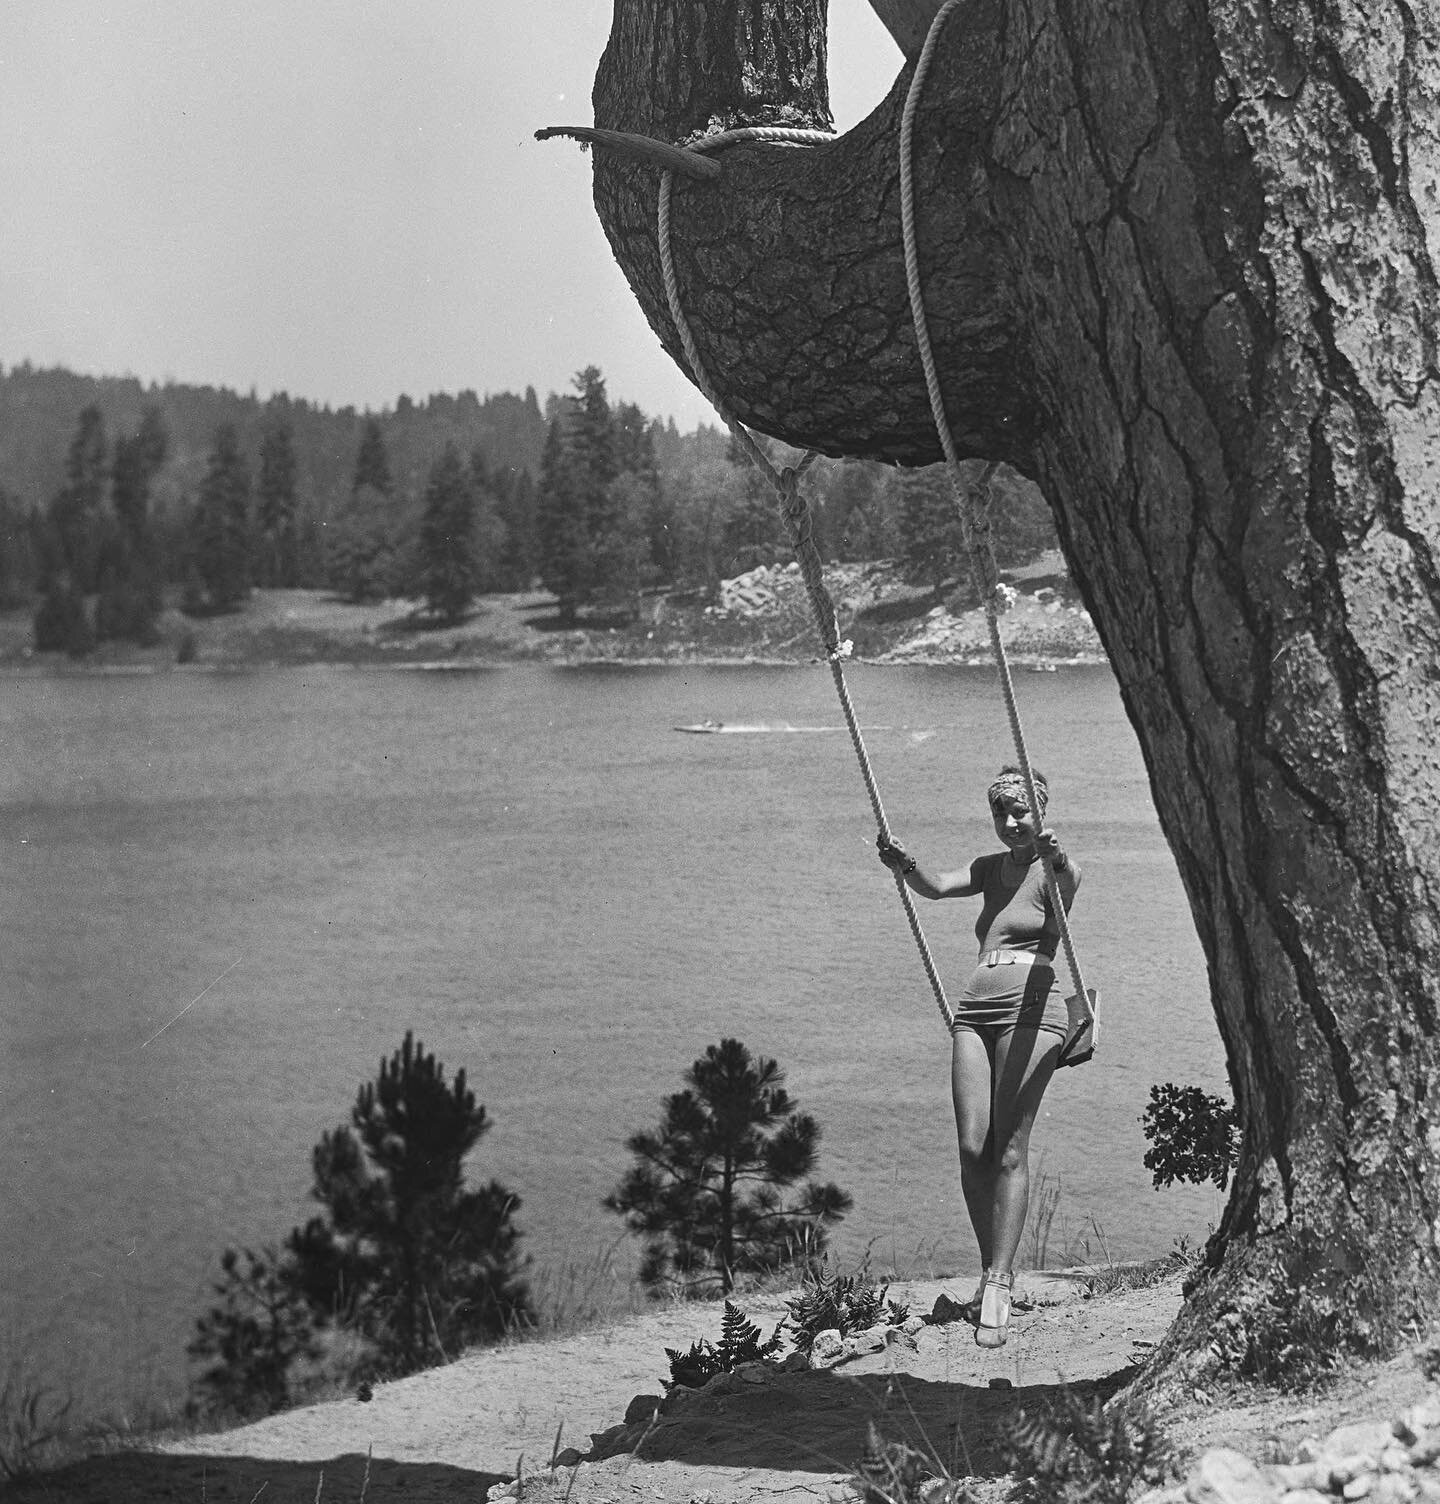 Swinging in to the weekend here at Jetties Waterfront. 

#lakearrowhead #1928